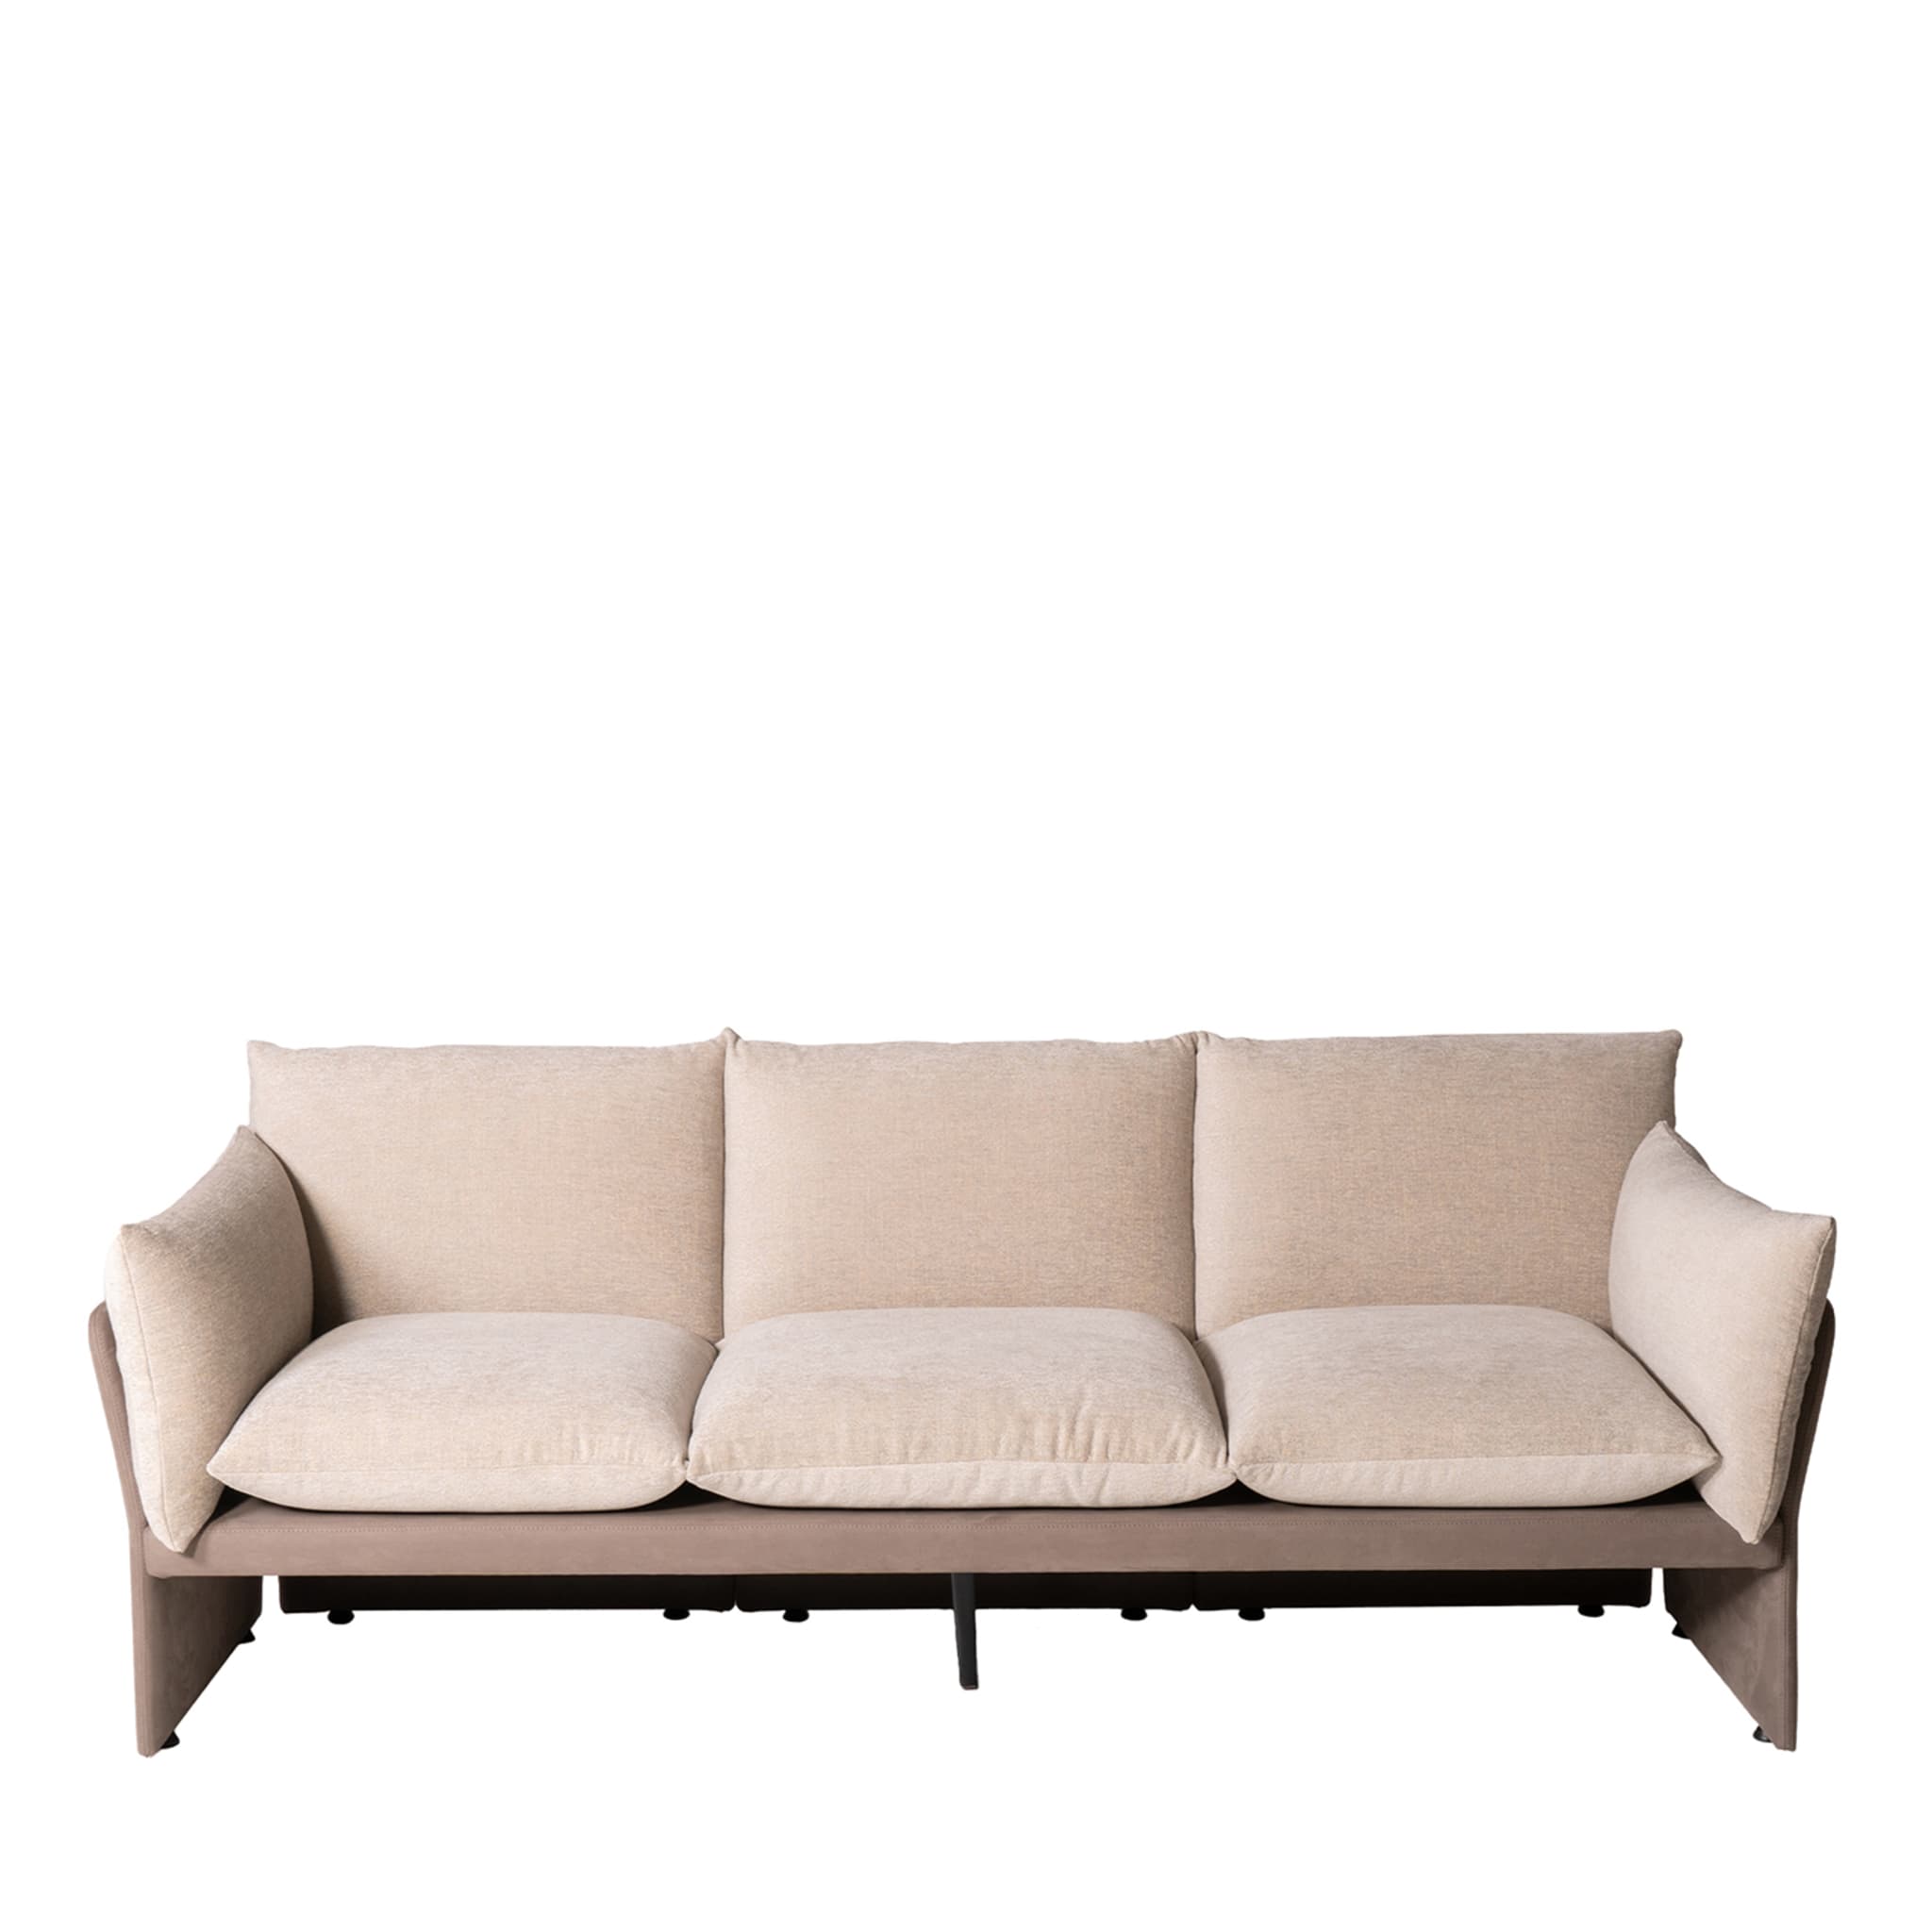 Farfalle 3-Seater Sofa By Marco And Giulio Mantellassi - Main view